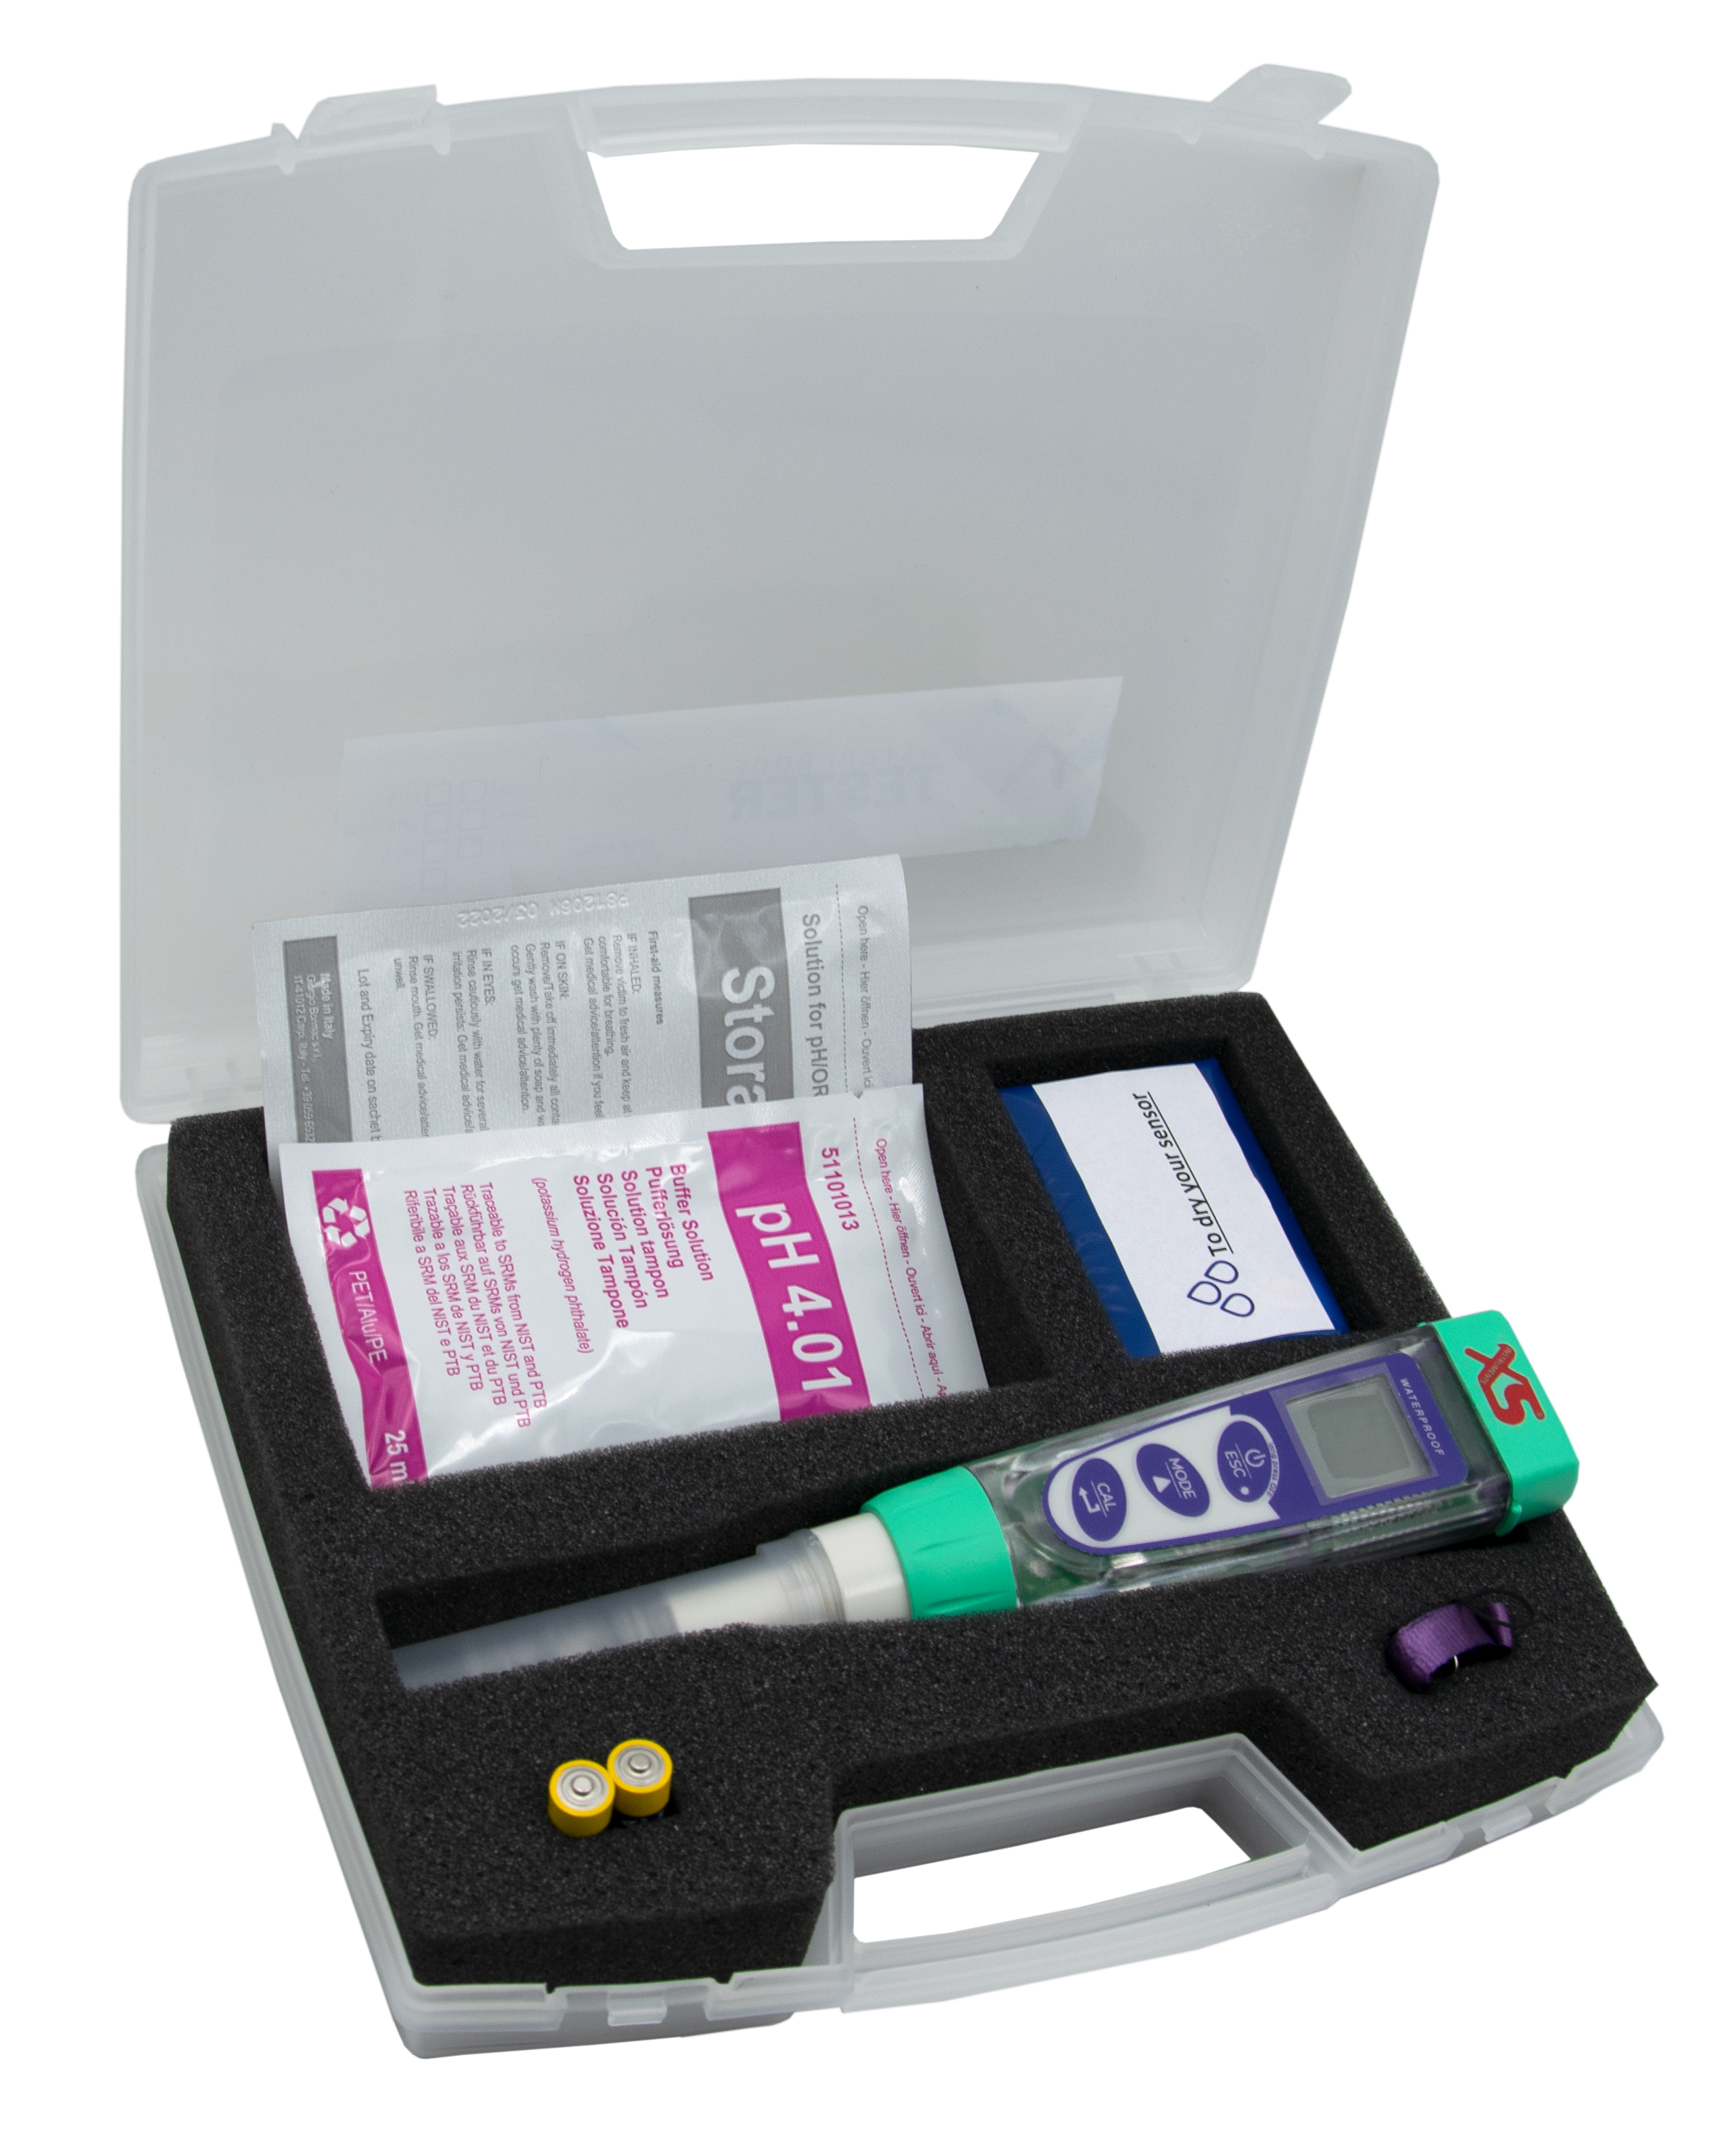 XS pX 4 Tester in carrying case - Handheld meter for pH/ORP/temperature measurement